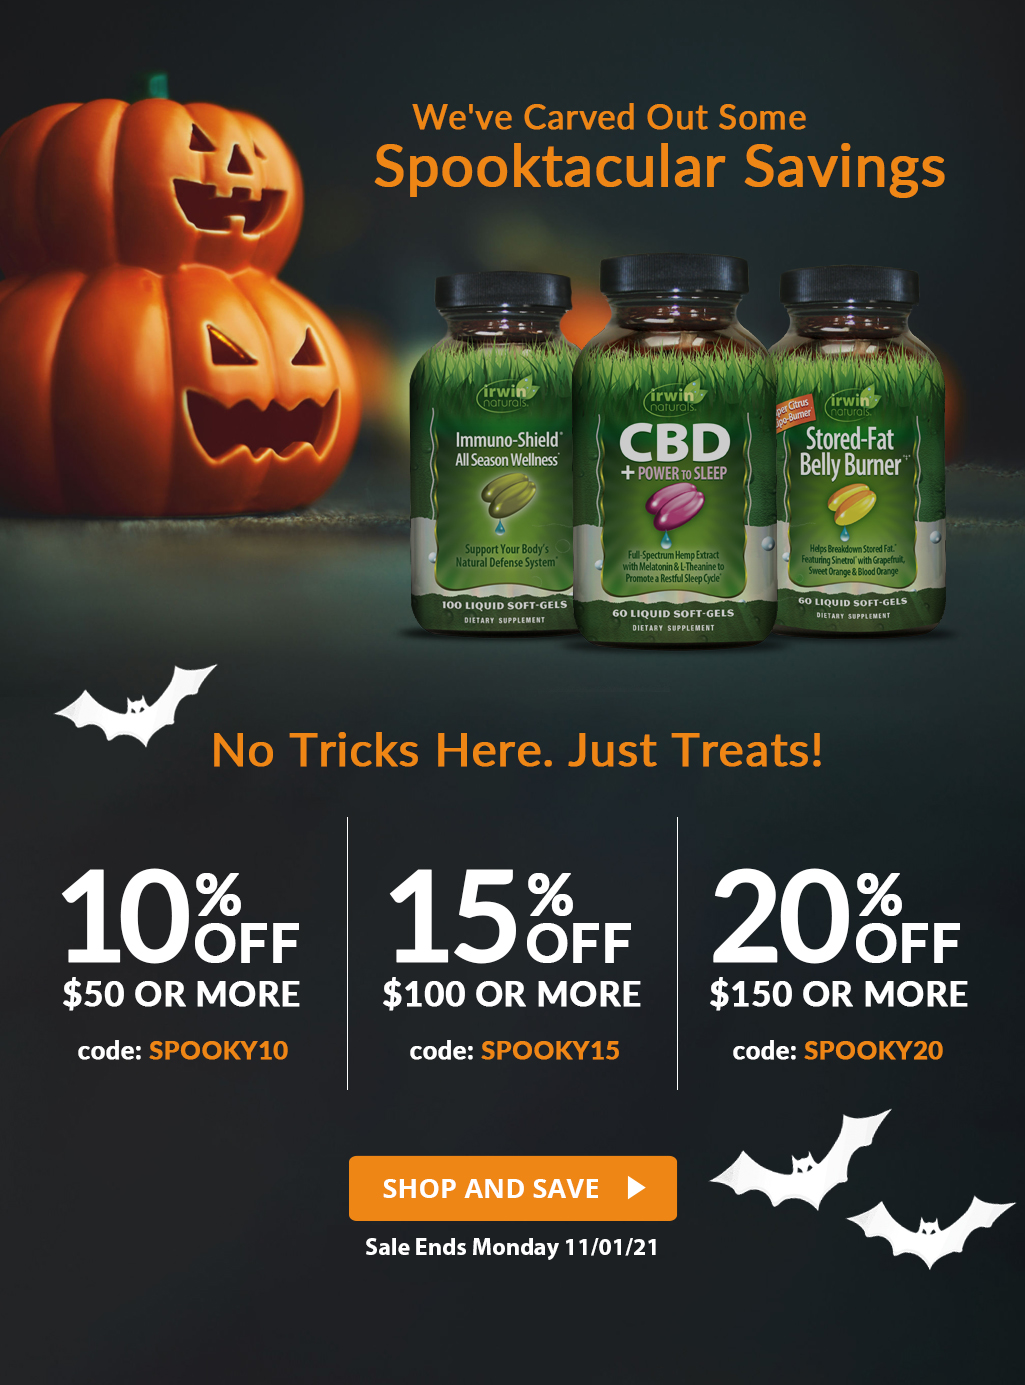 Up to 20% OFF Sitewide. Spooktacular Savings! 